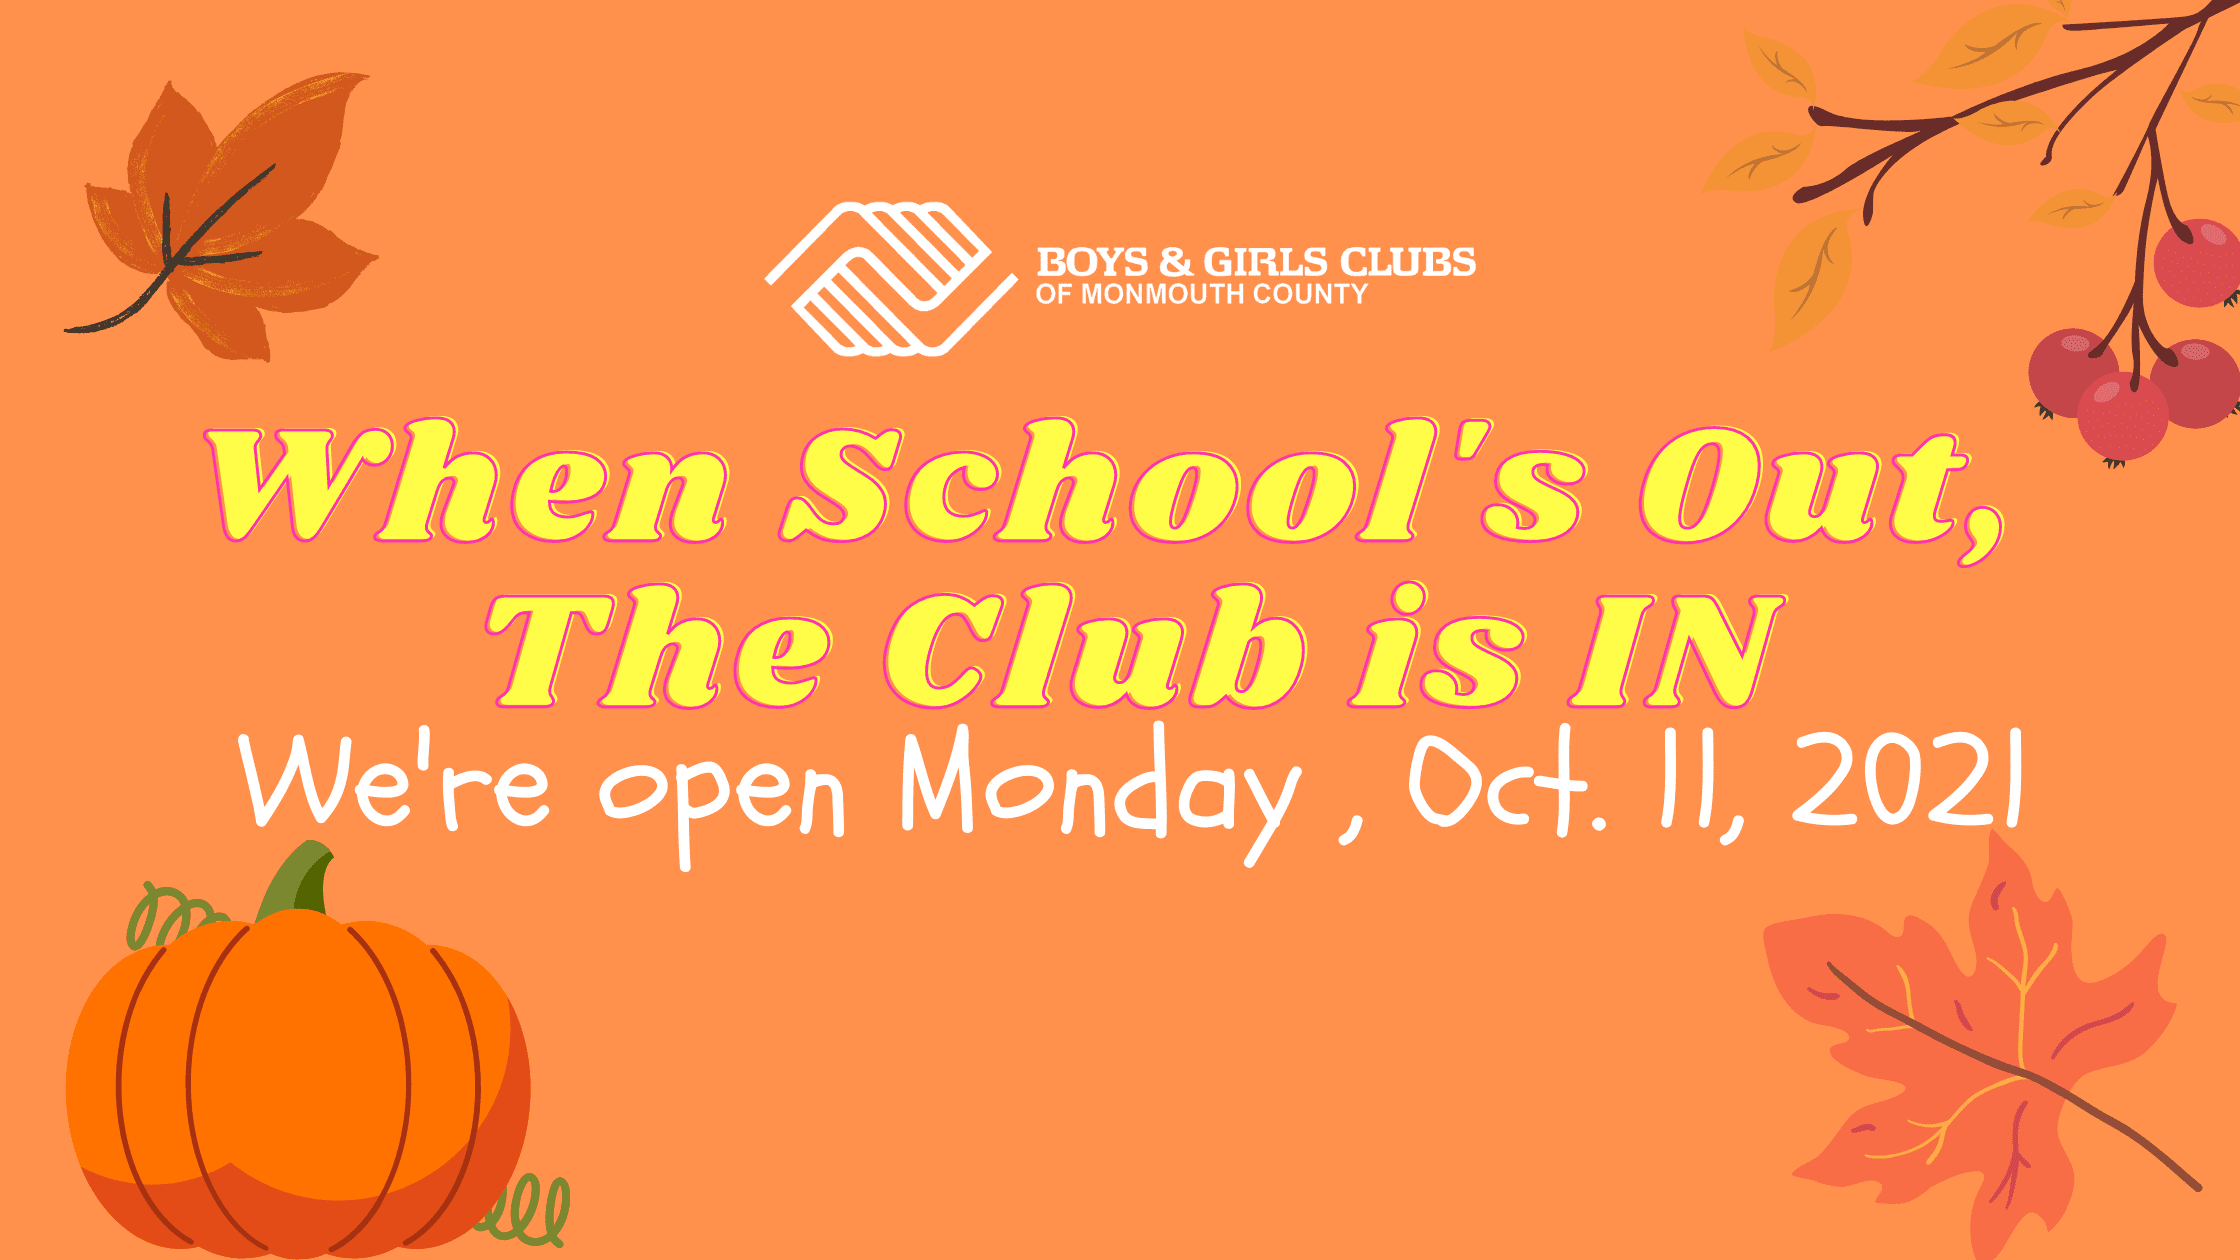 The Boys & Girls Clubs of Monmouth County are Open Monday, October 11, 2021